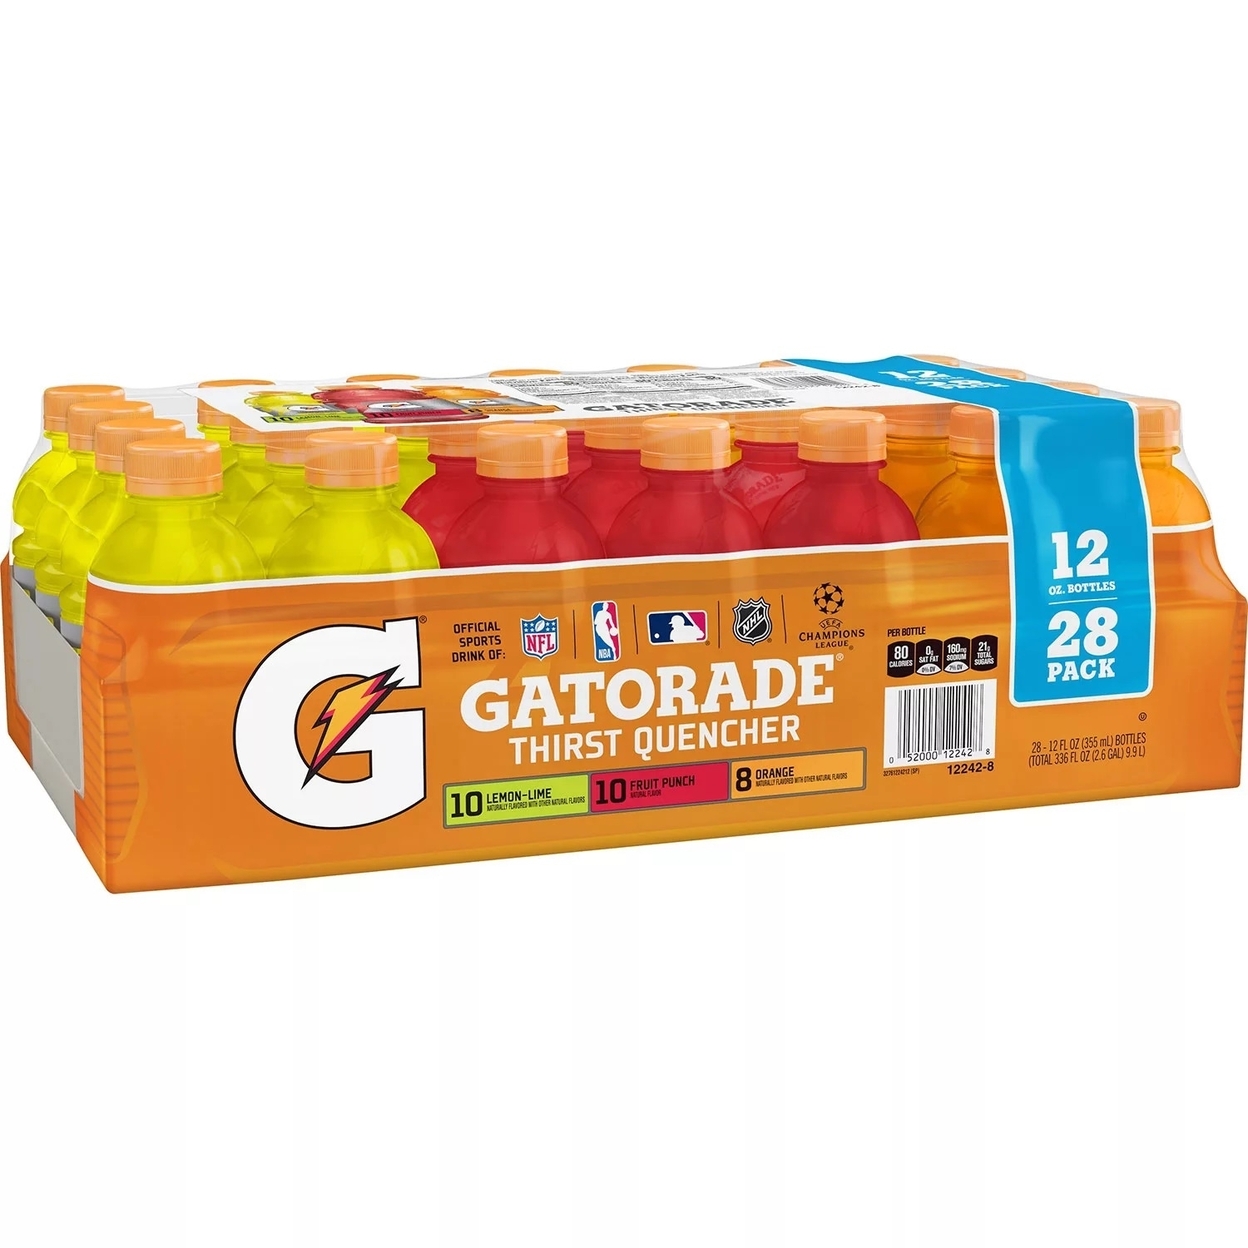 Gatorade Core Variety Pack, 12 Fluid Ounce (Pack Of 28)